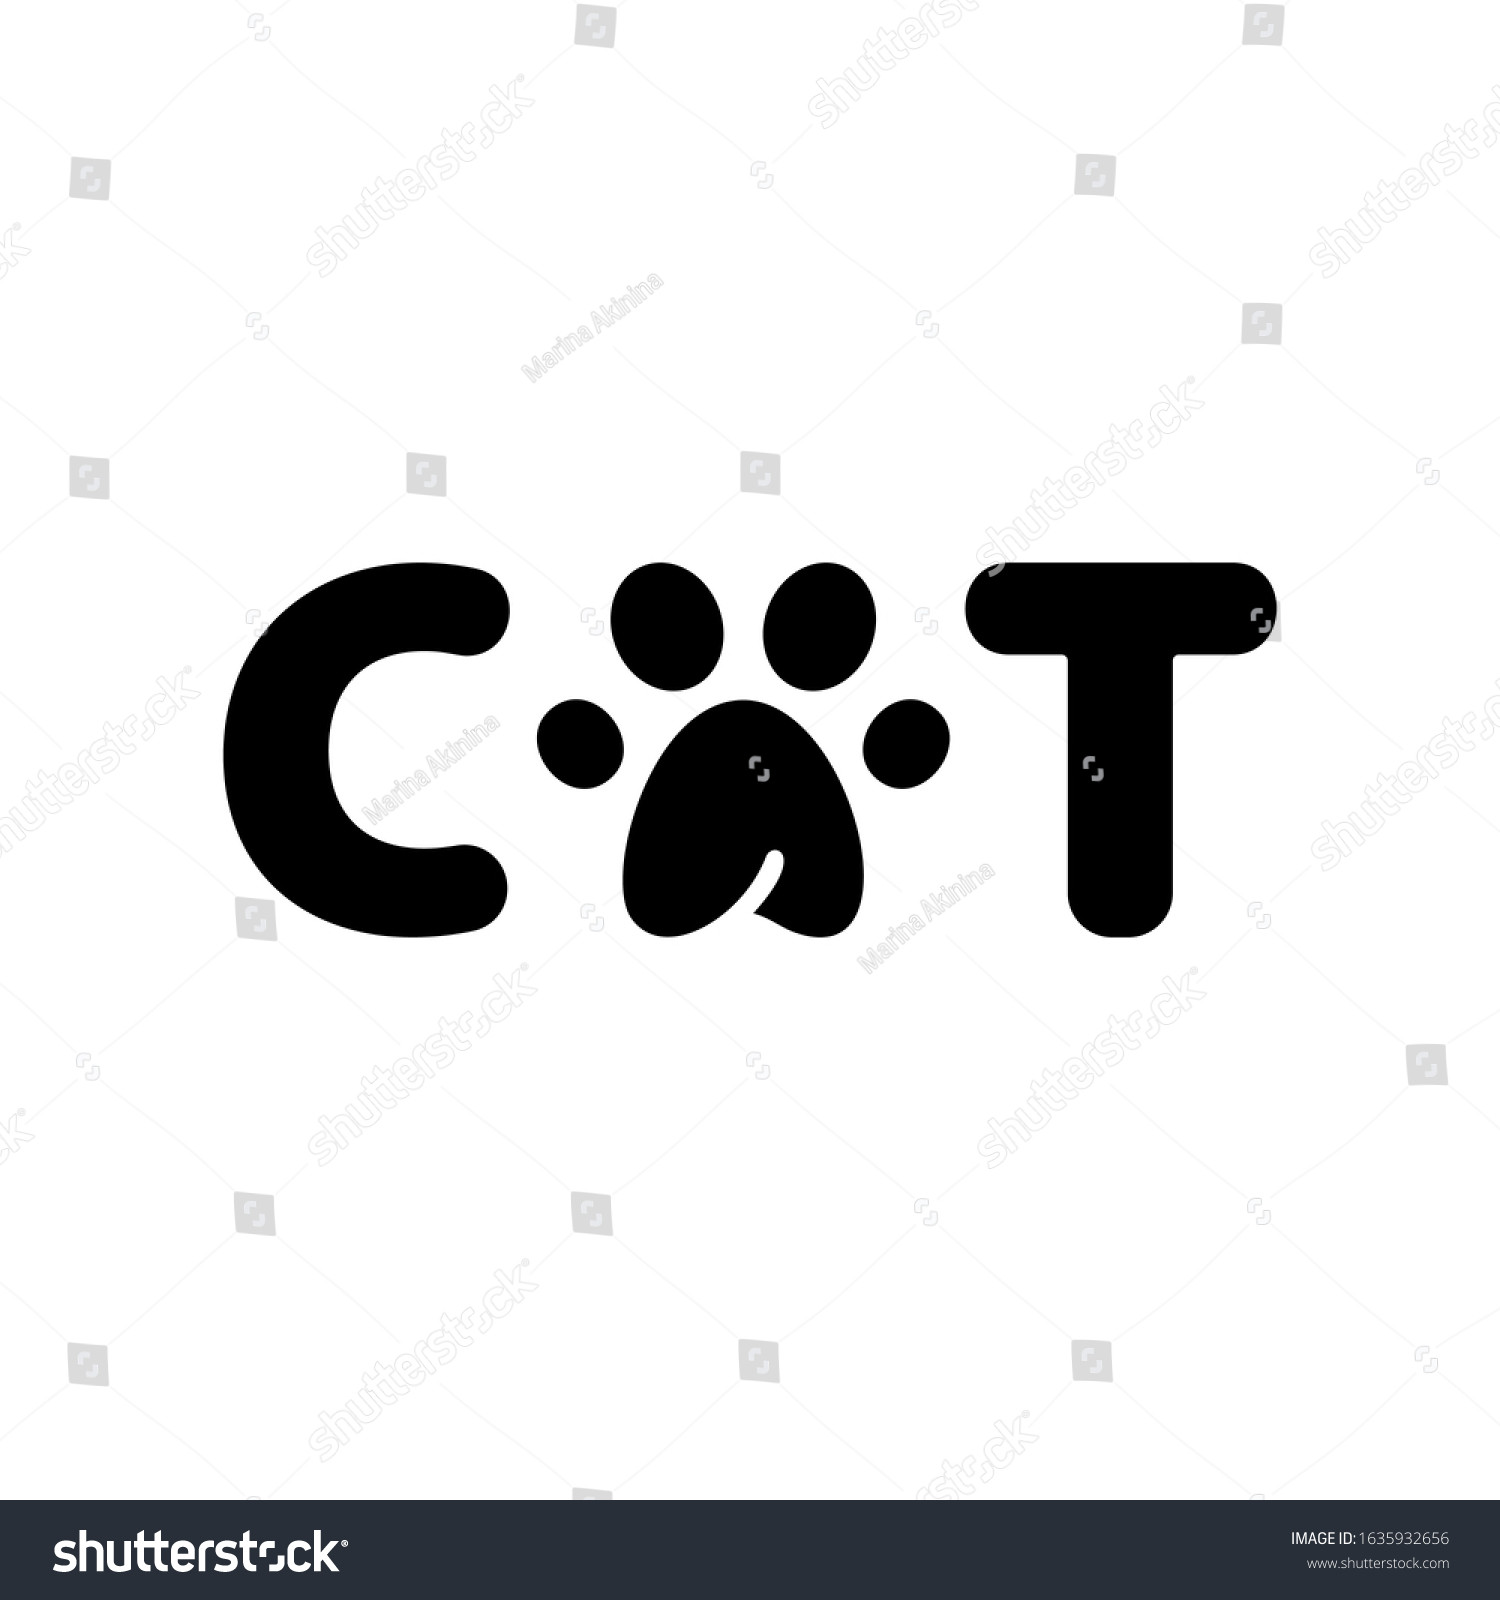 stock vector cutout silhouette title cat with paw print instead of letter a outline wordmark text logo flat